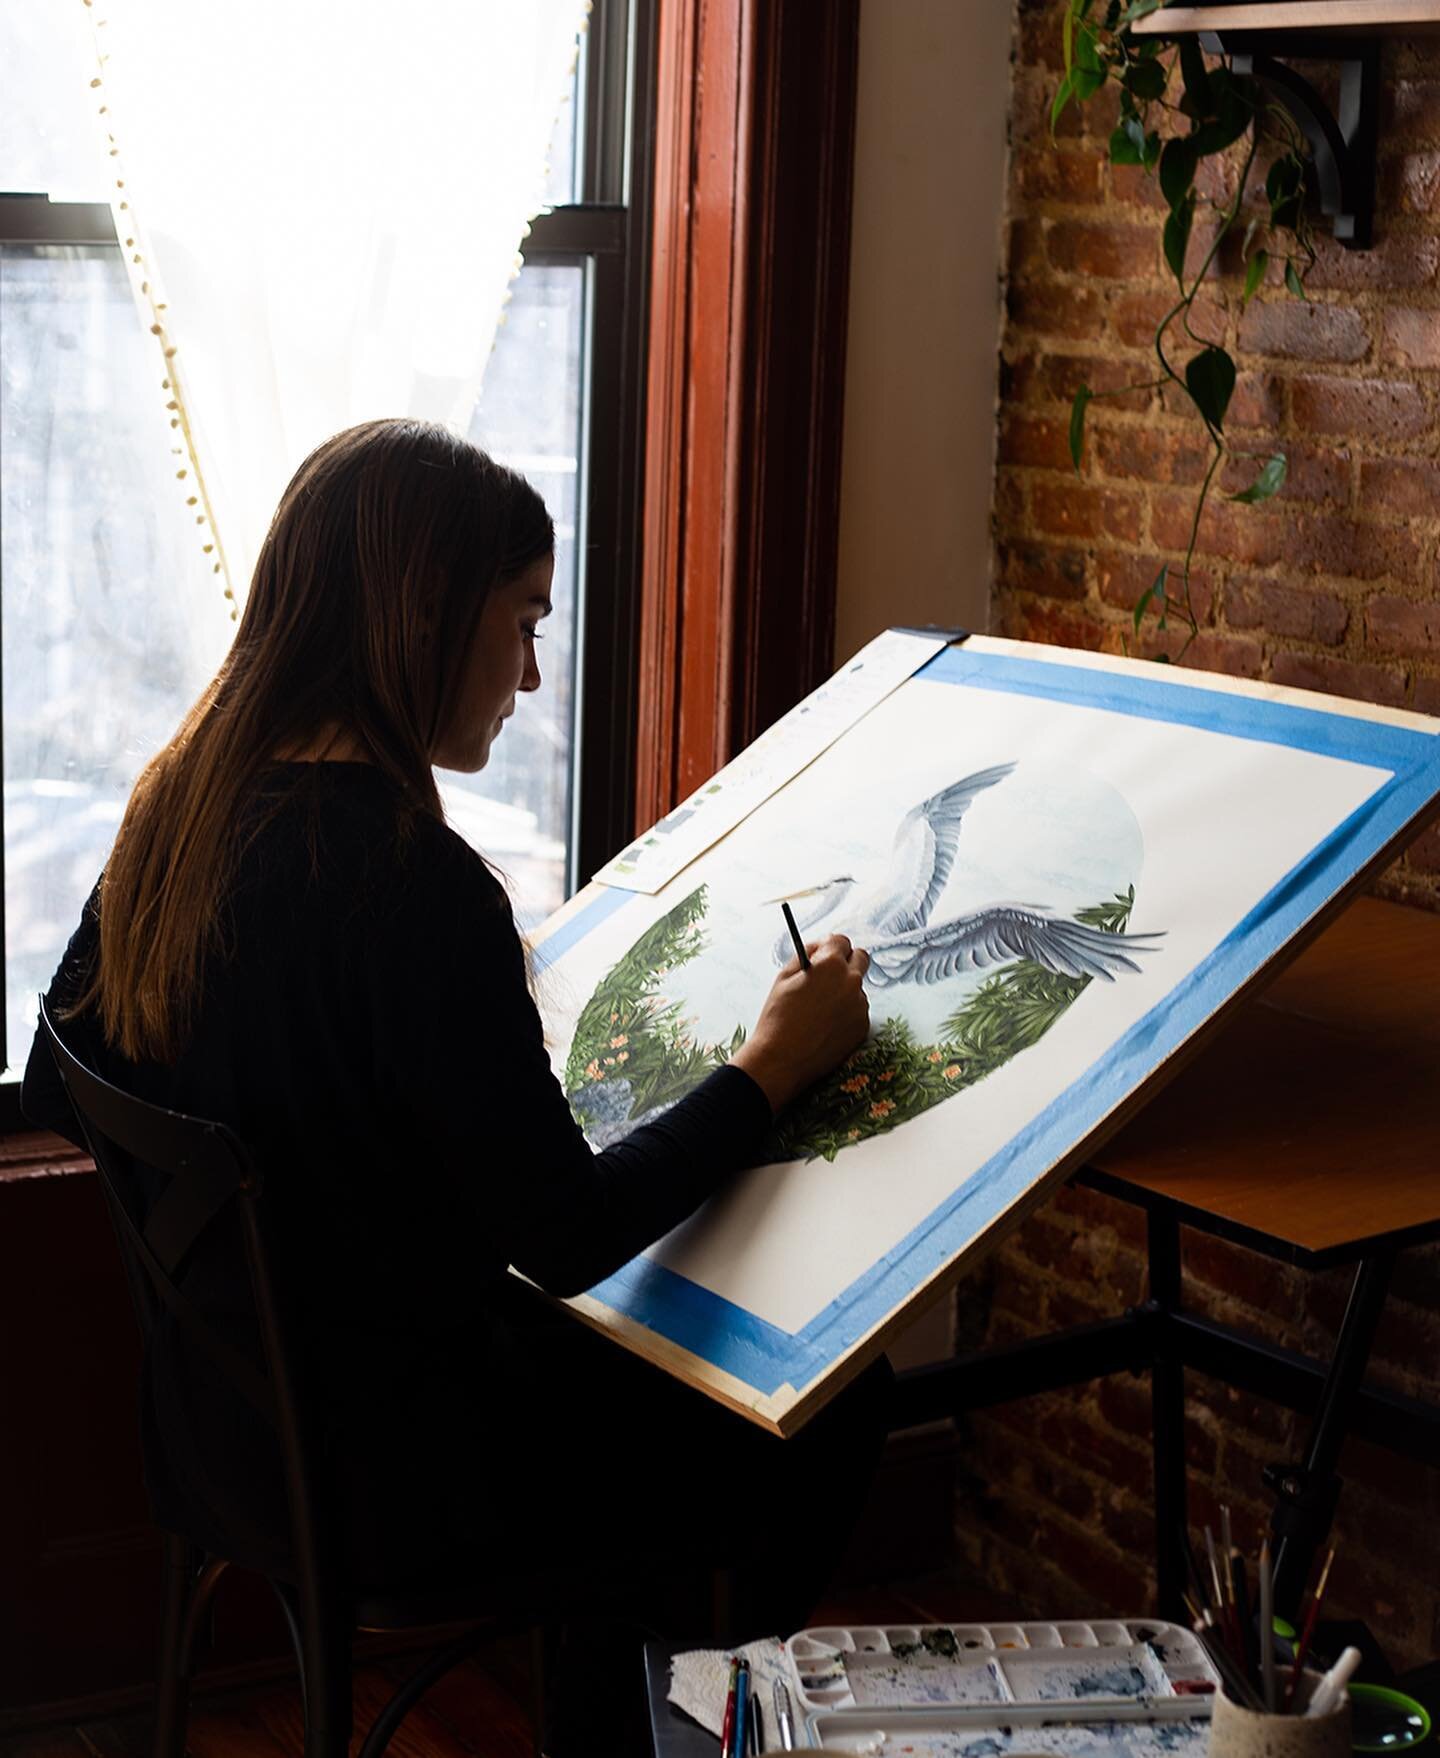 Here&rsquo;s me in my studio working on a piece that I&rsquo;m excited to share with you s👀n. I&rsquo;ve been studying blue heron anatomy and damn... their wing structure is ✨spectacular✨I don&rsquo;t get to see many creatures in this city, aside fr